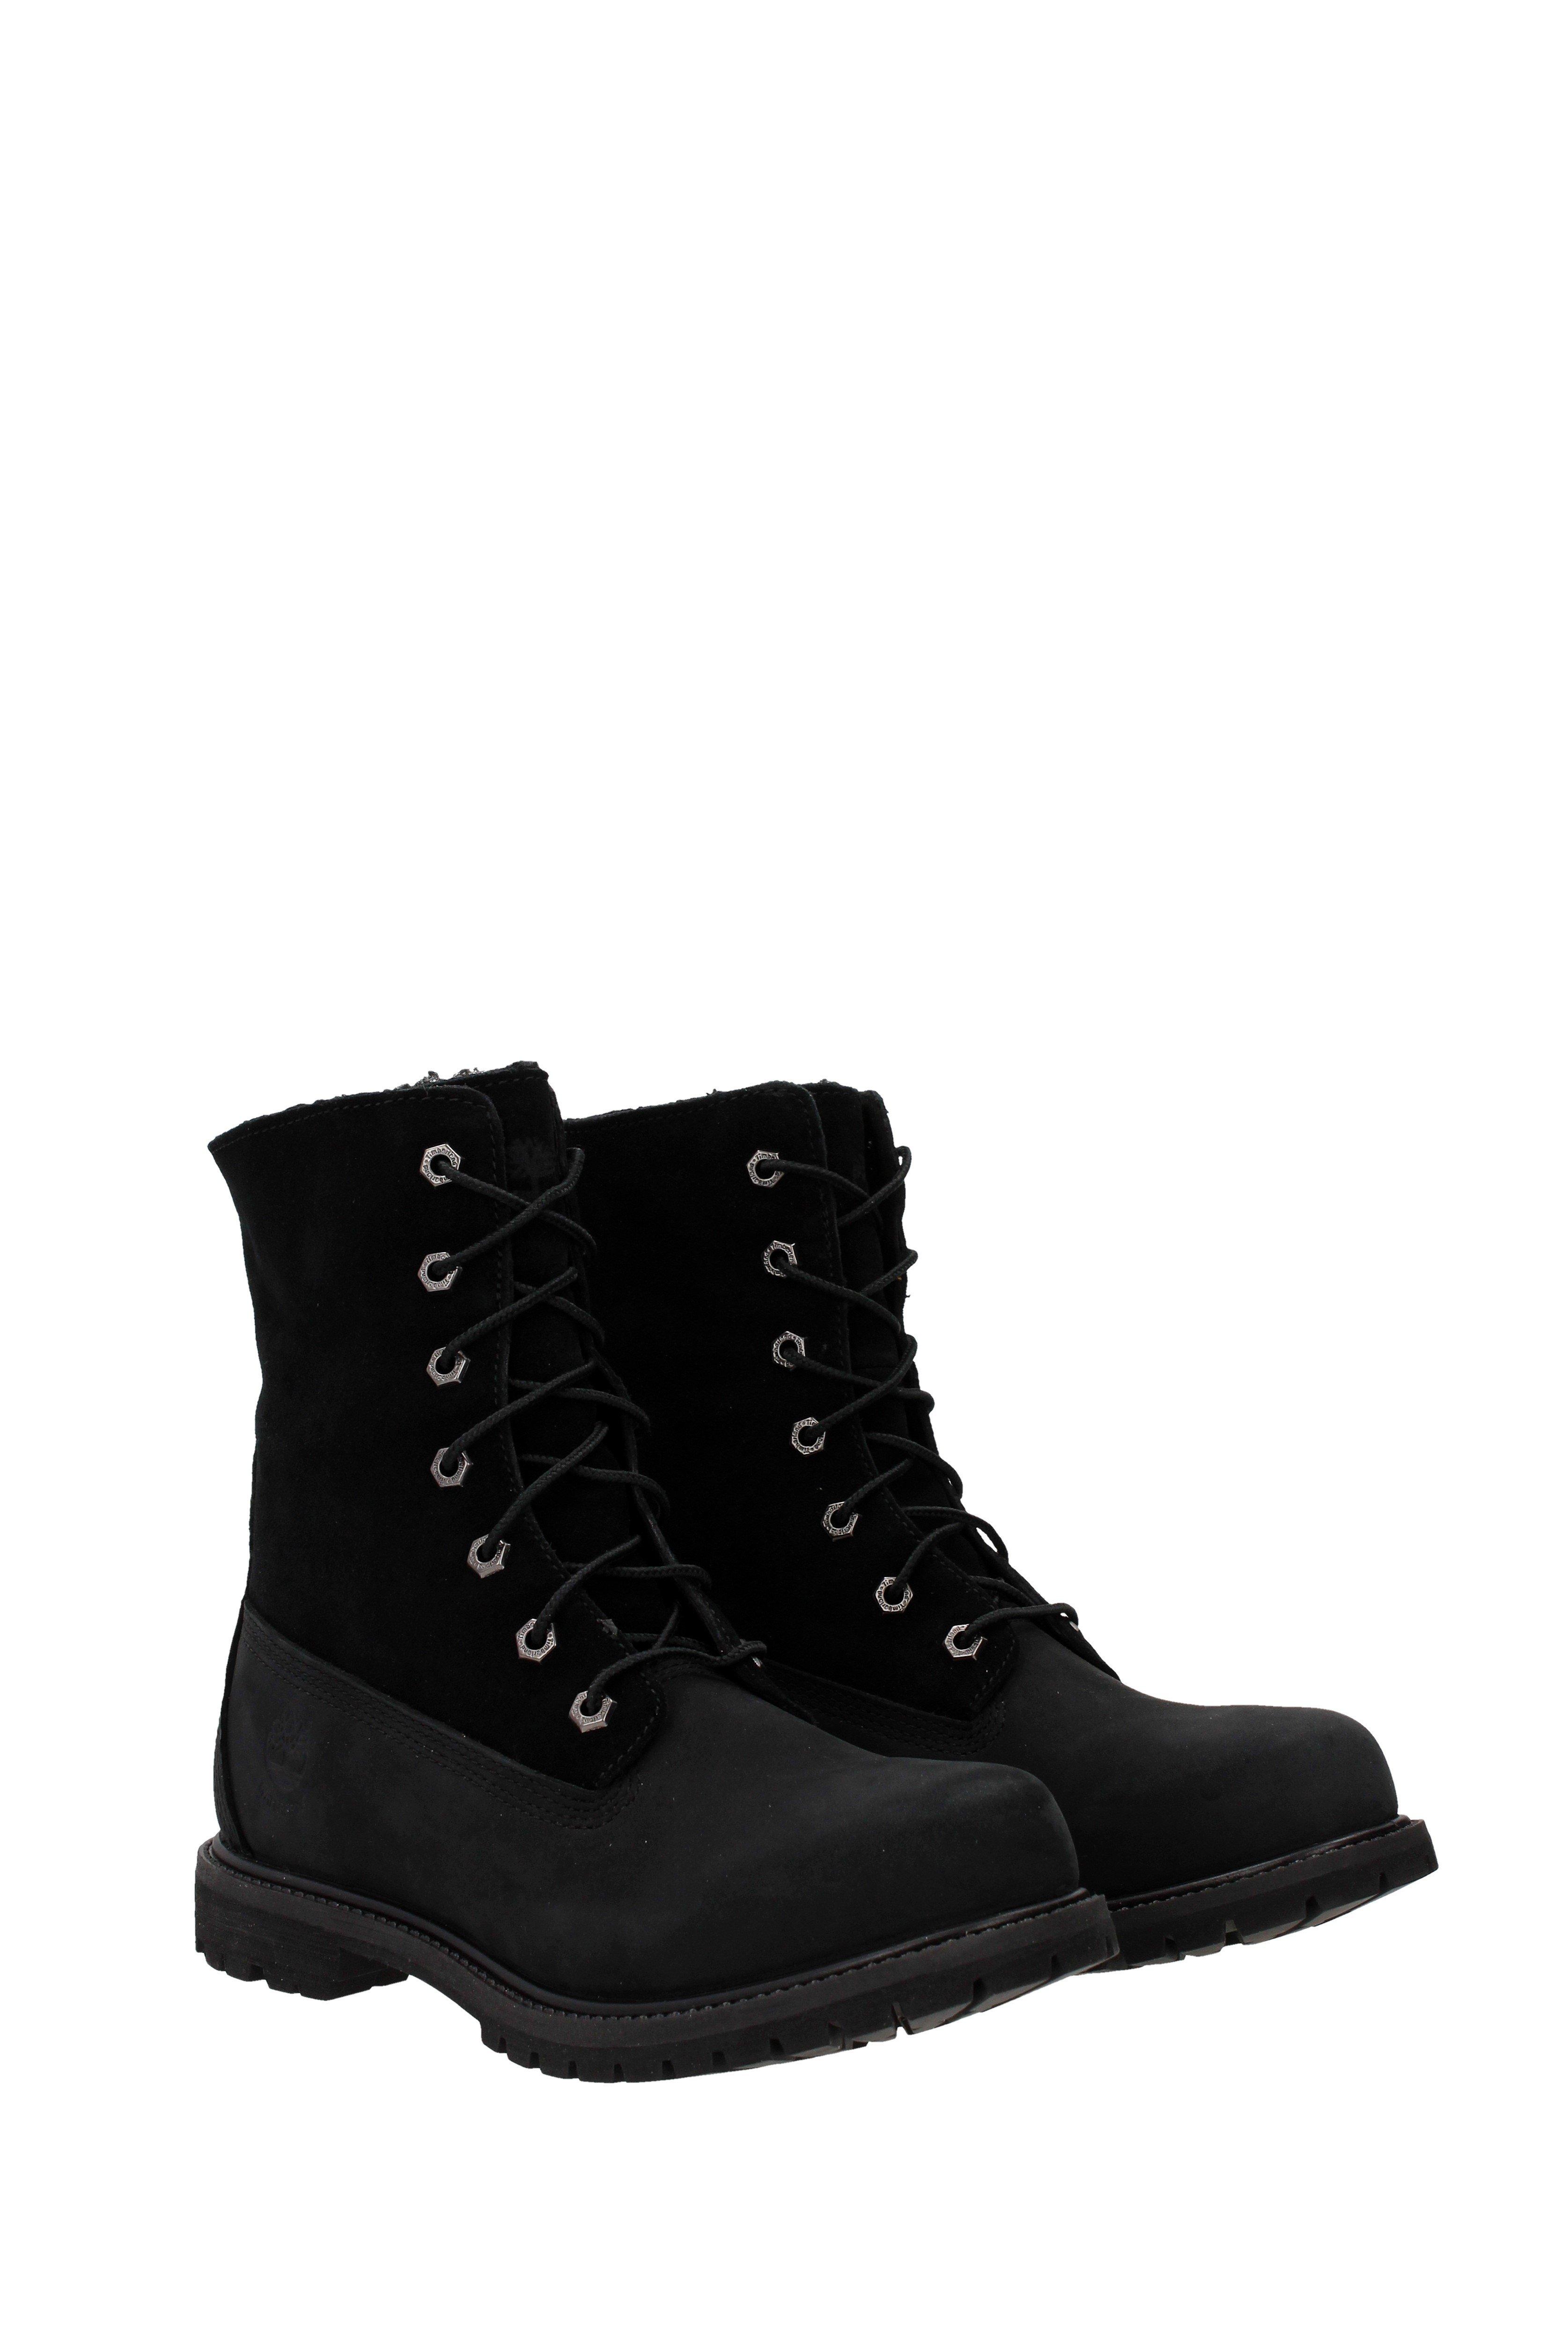 Timberland Leather Ankle Boots Women Black - Lyst